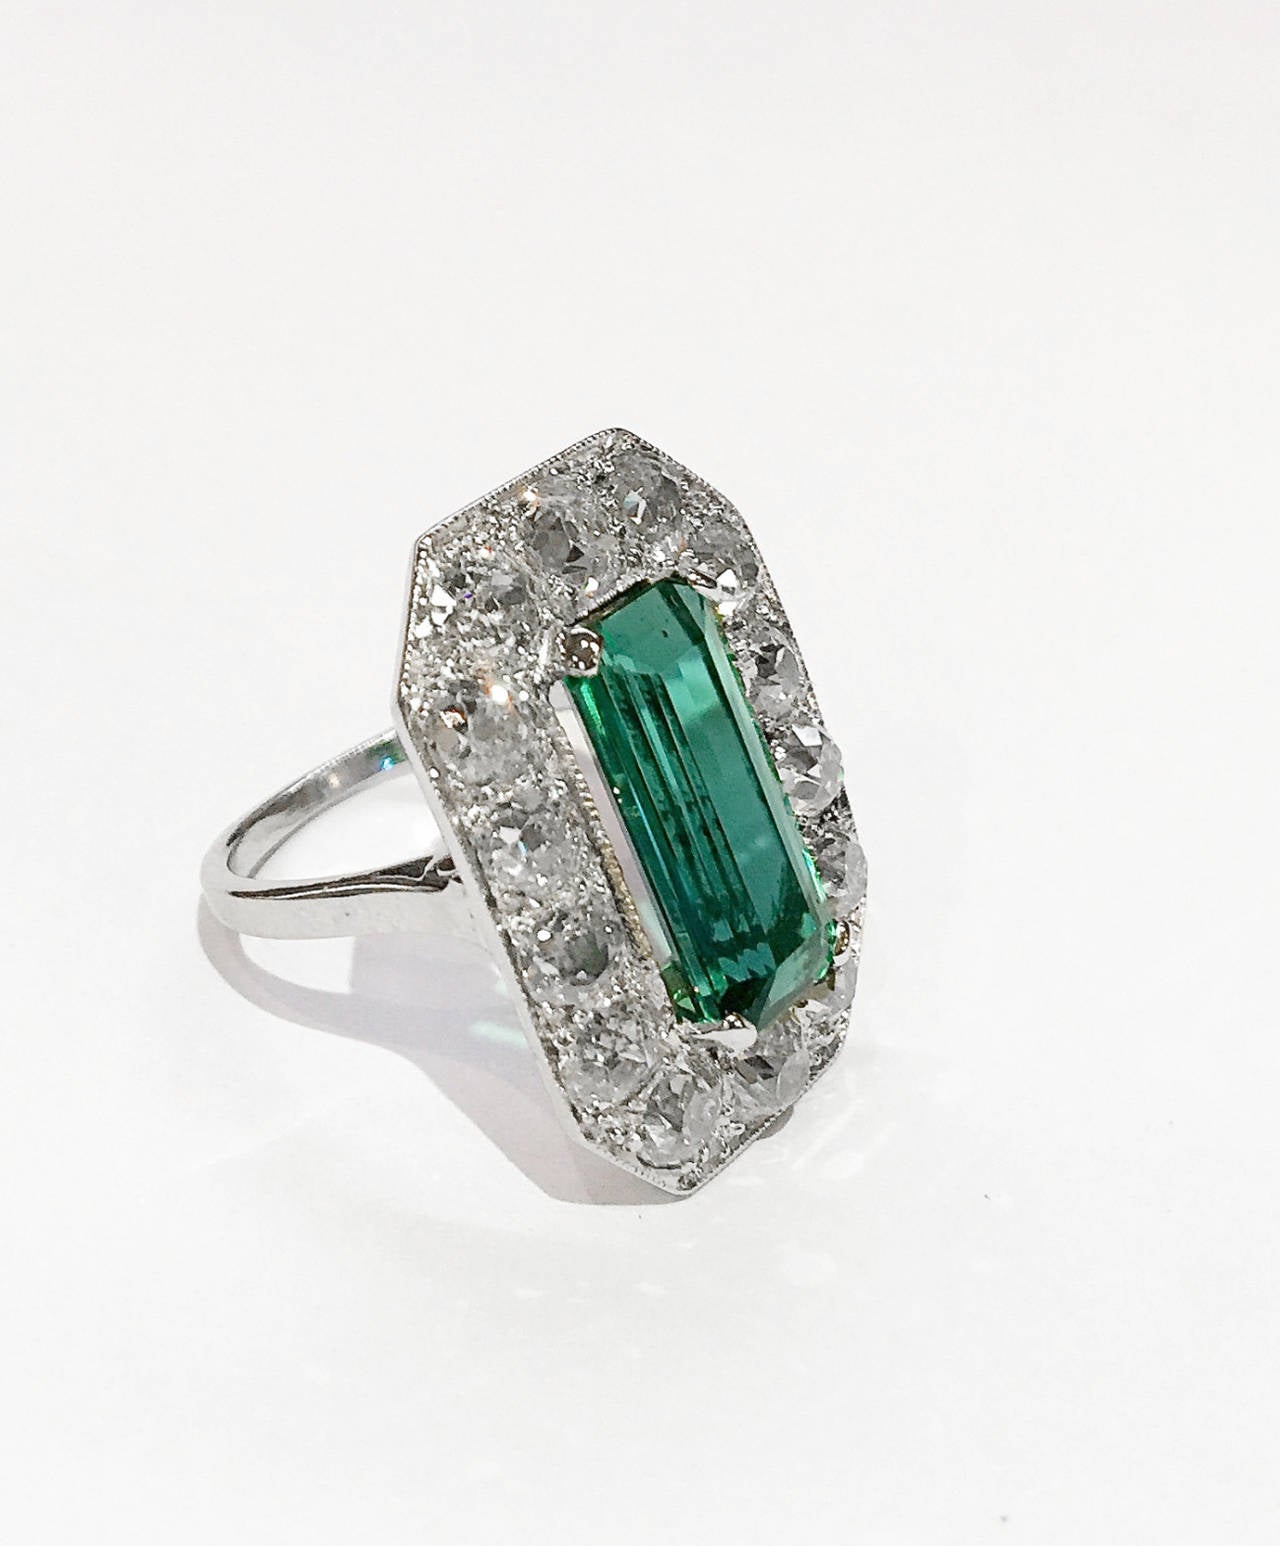 An Art deco platinum ring set with old European cut diamonds and a long rectangular green tourmaline in the center. 
Weight of diamonds : about 4 carats. 
Weight of the tourmaline : 4,80 carats
Size : 7 sizable. 
Circa 1920